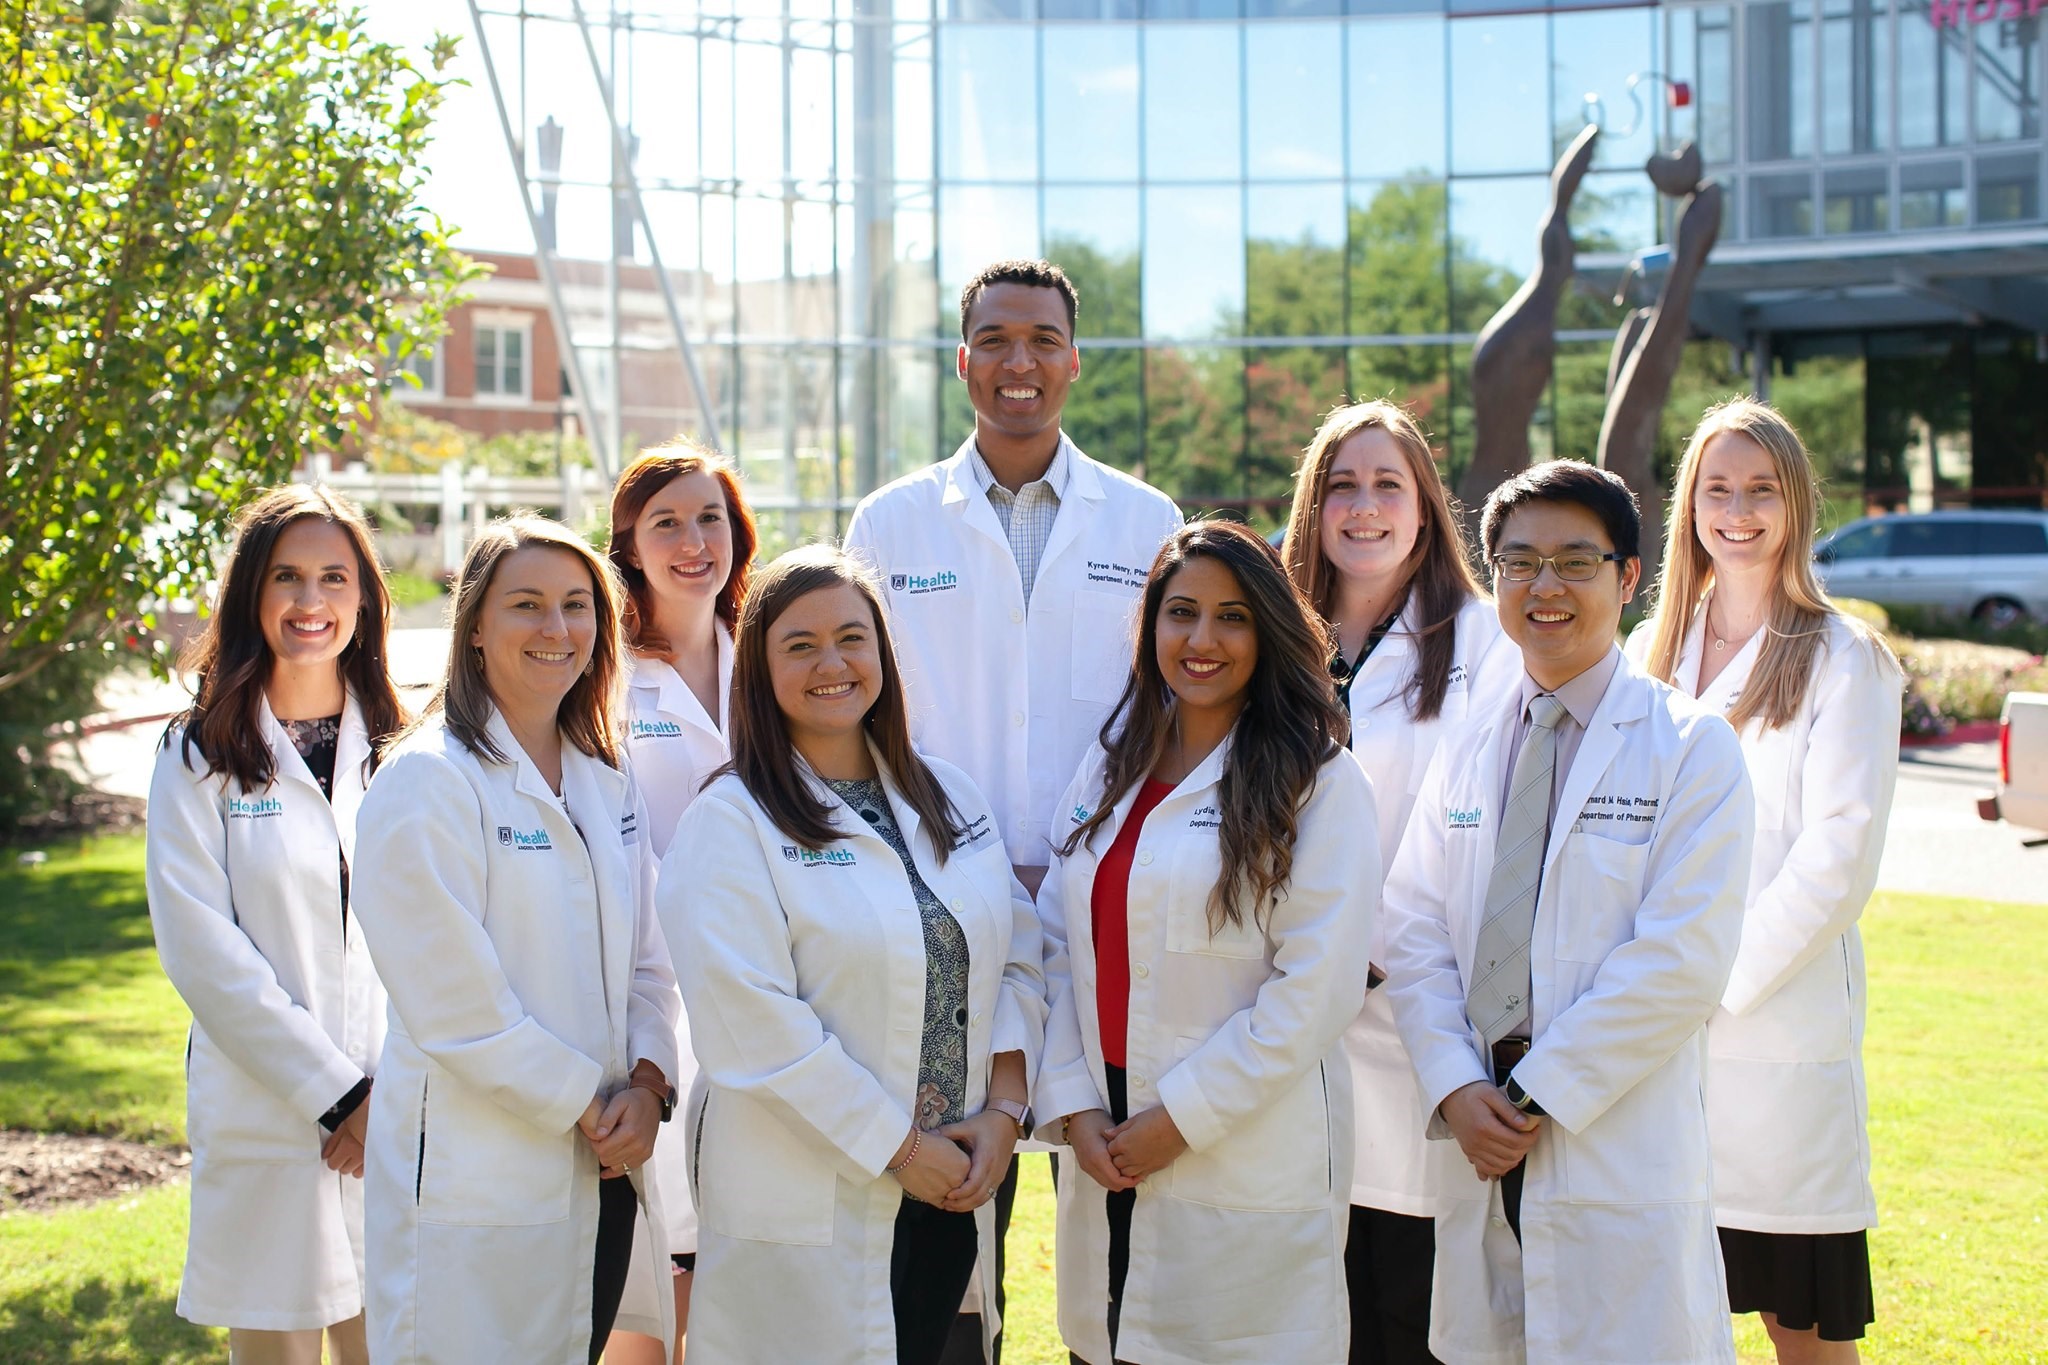 Group photo of Residency Class of 2019-2020